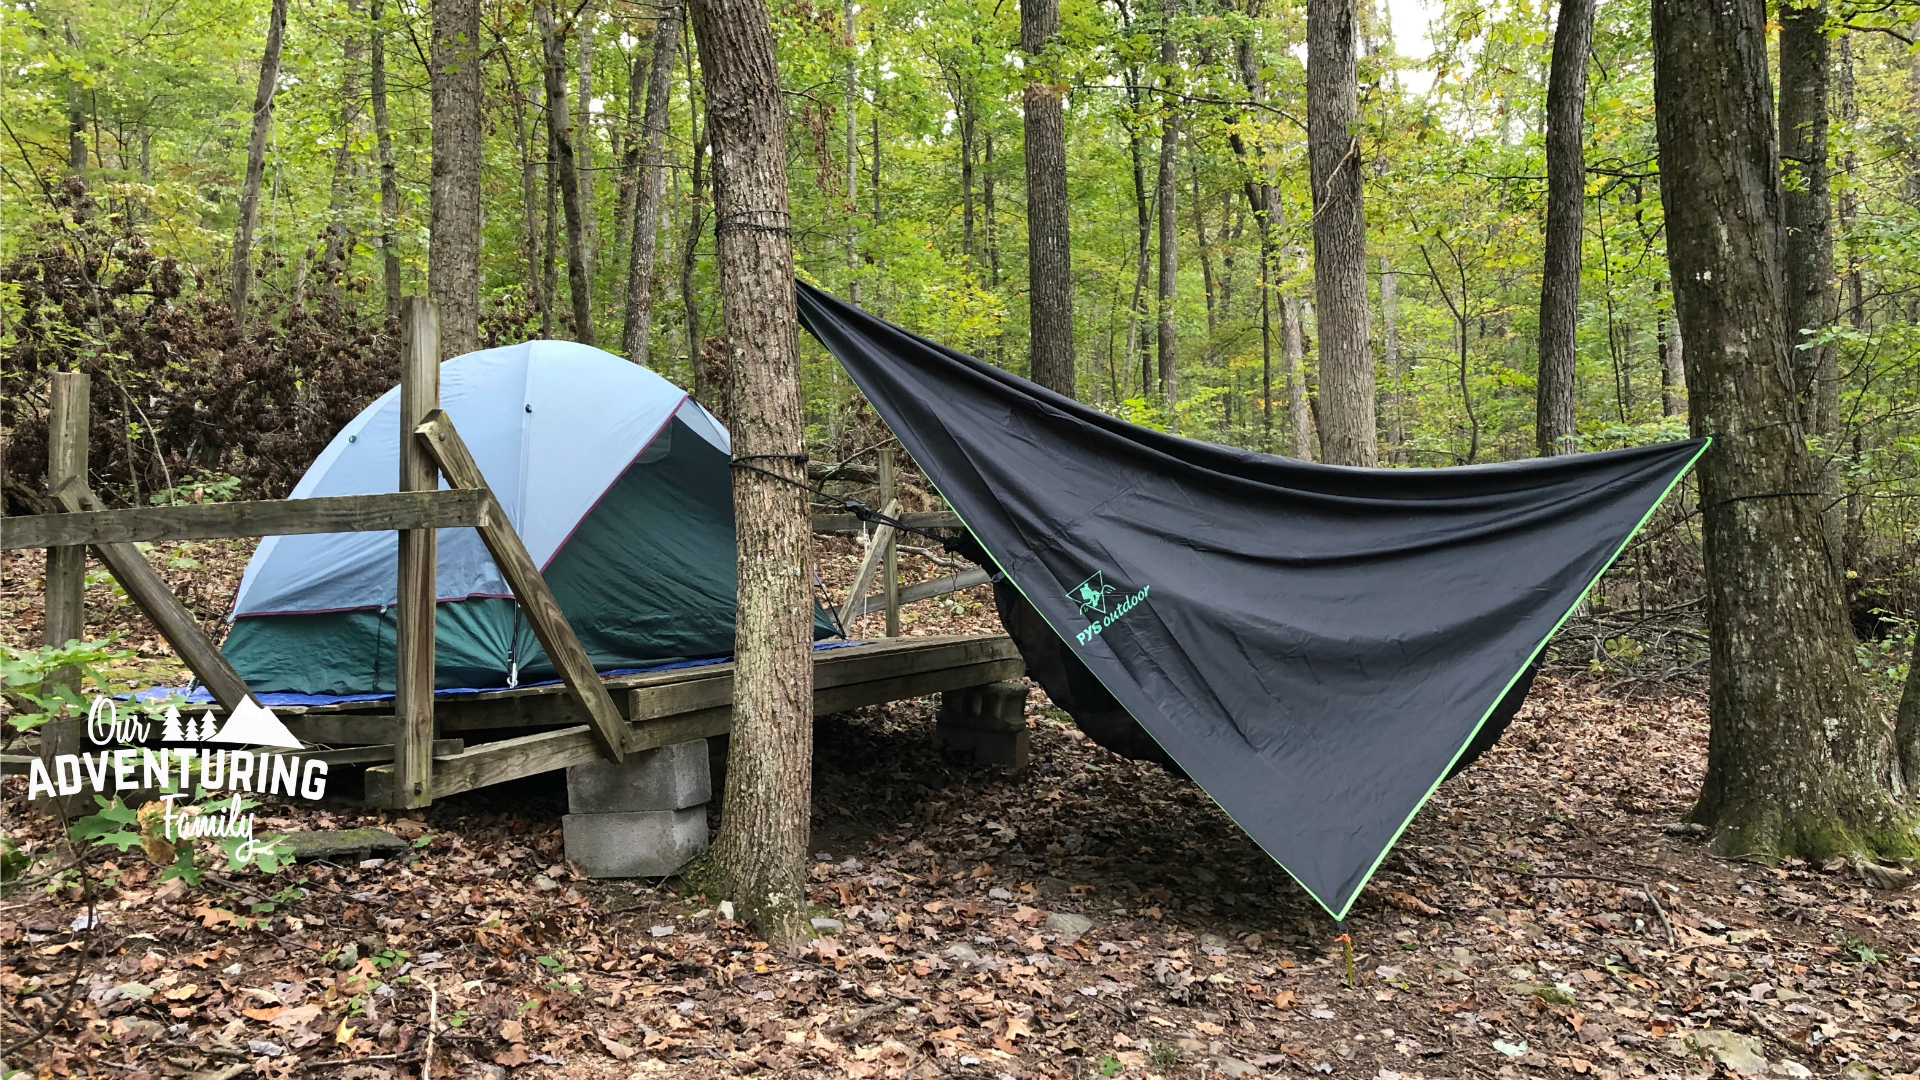 Hammocks are more popular than ever, and you can give it a without spending much money. You can even have a comfortable night when the weather is cold. Learn more at ouradventuringfamily.com.